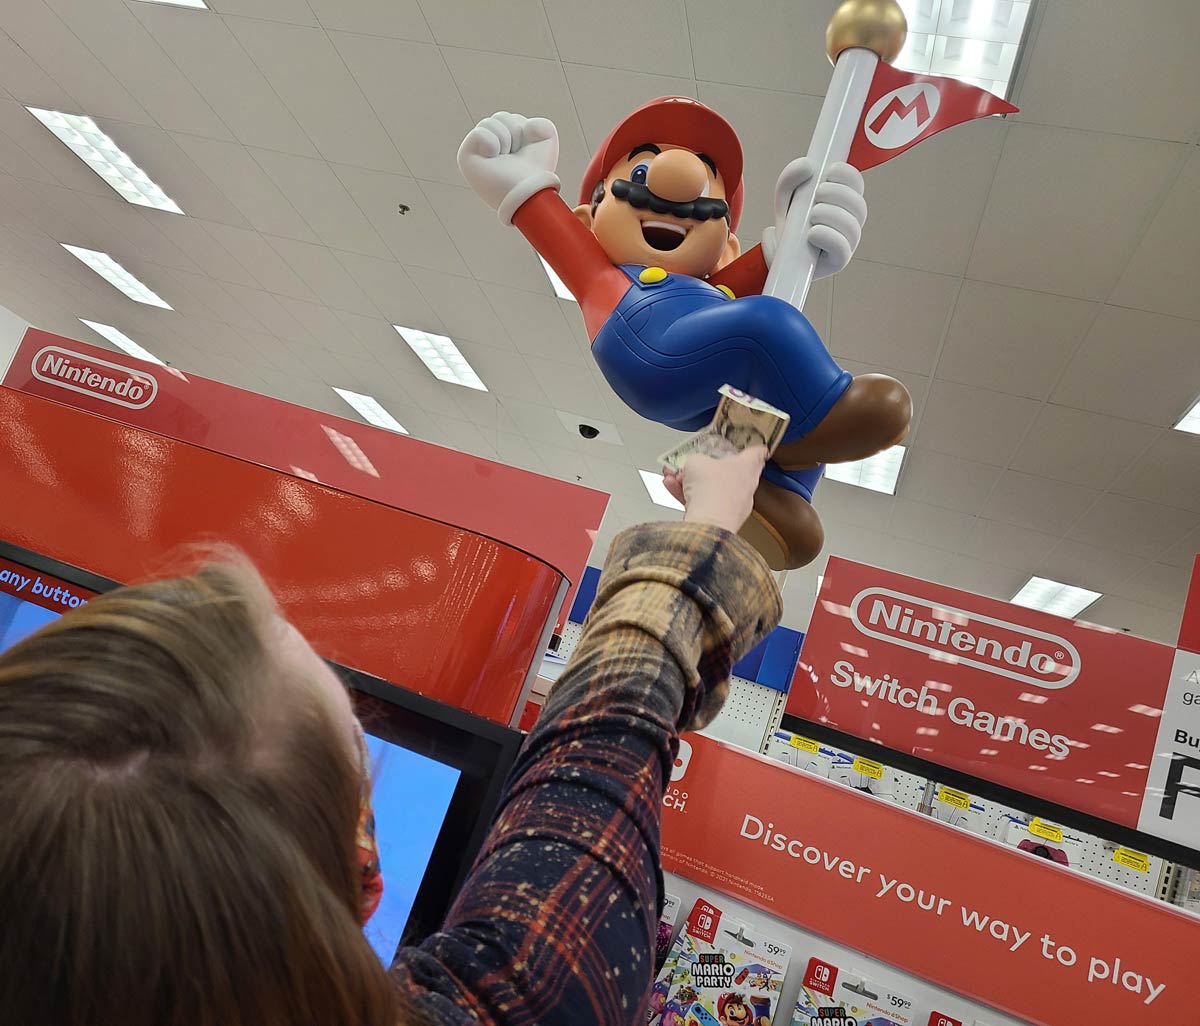 Times have been hard for Mario